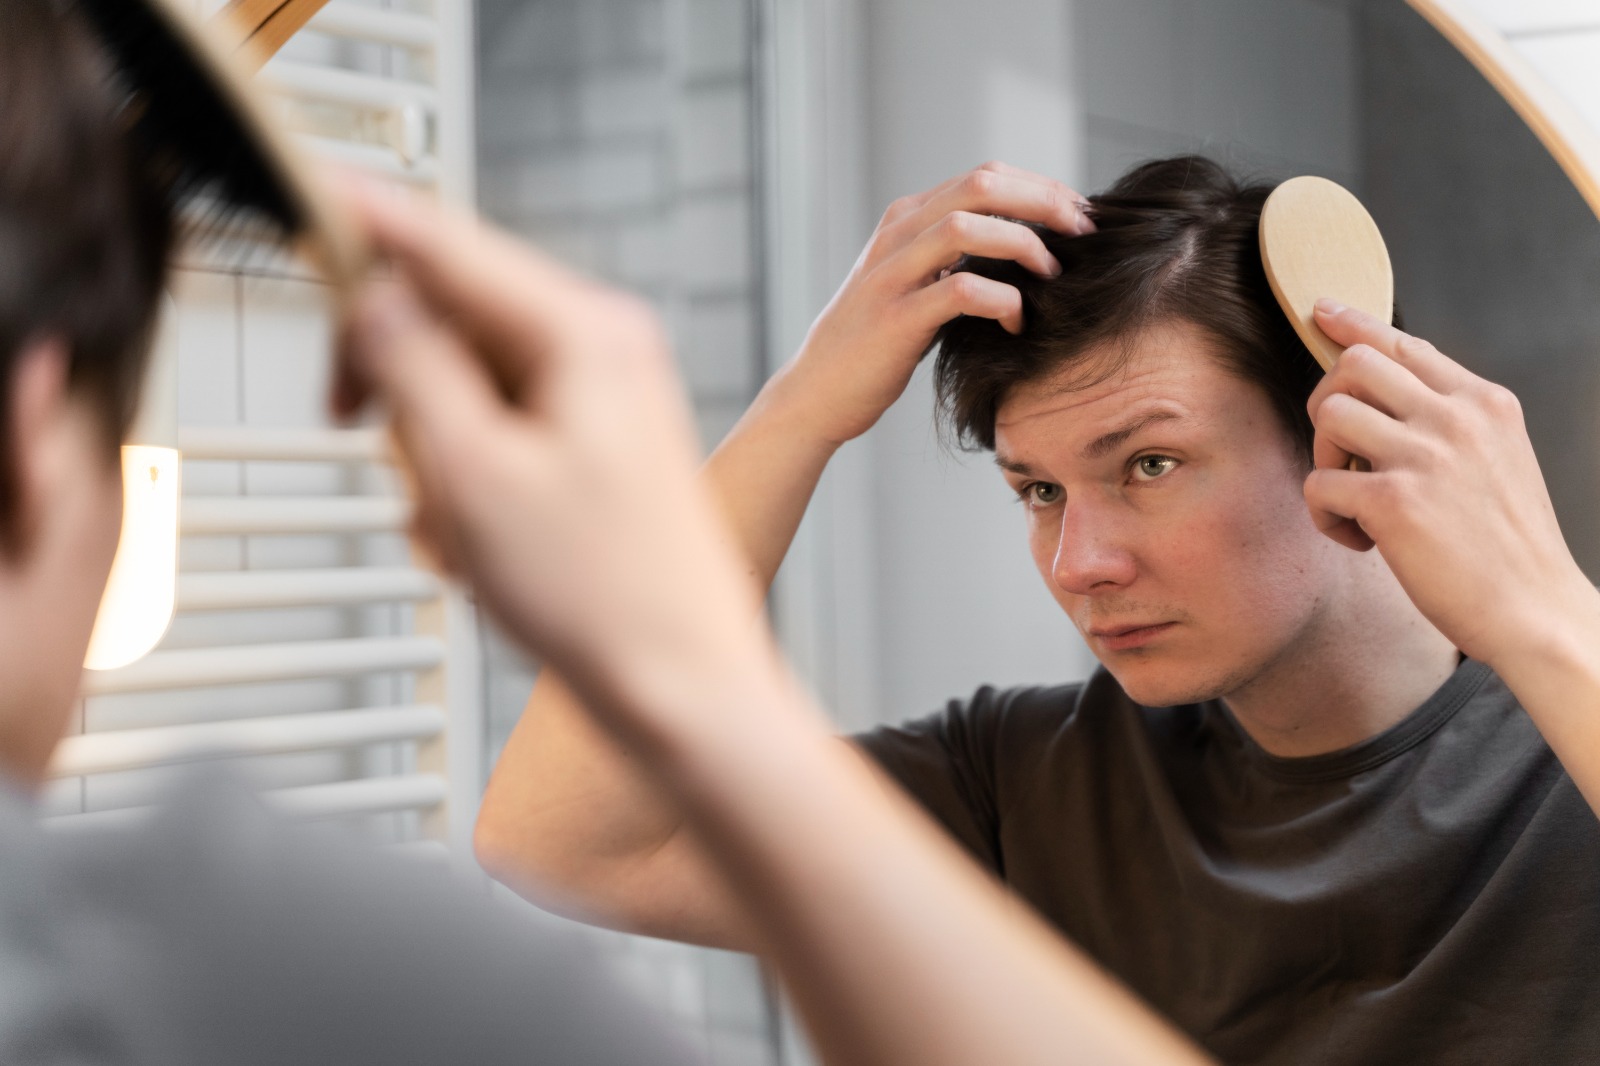 Things to take care of to avoid hair loss